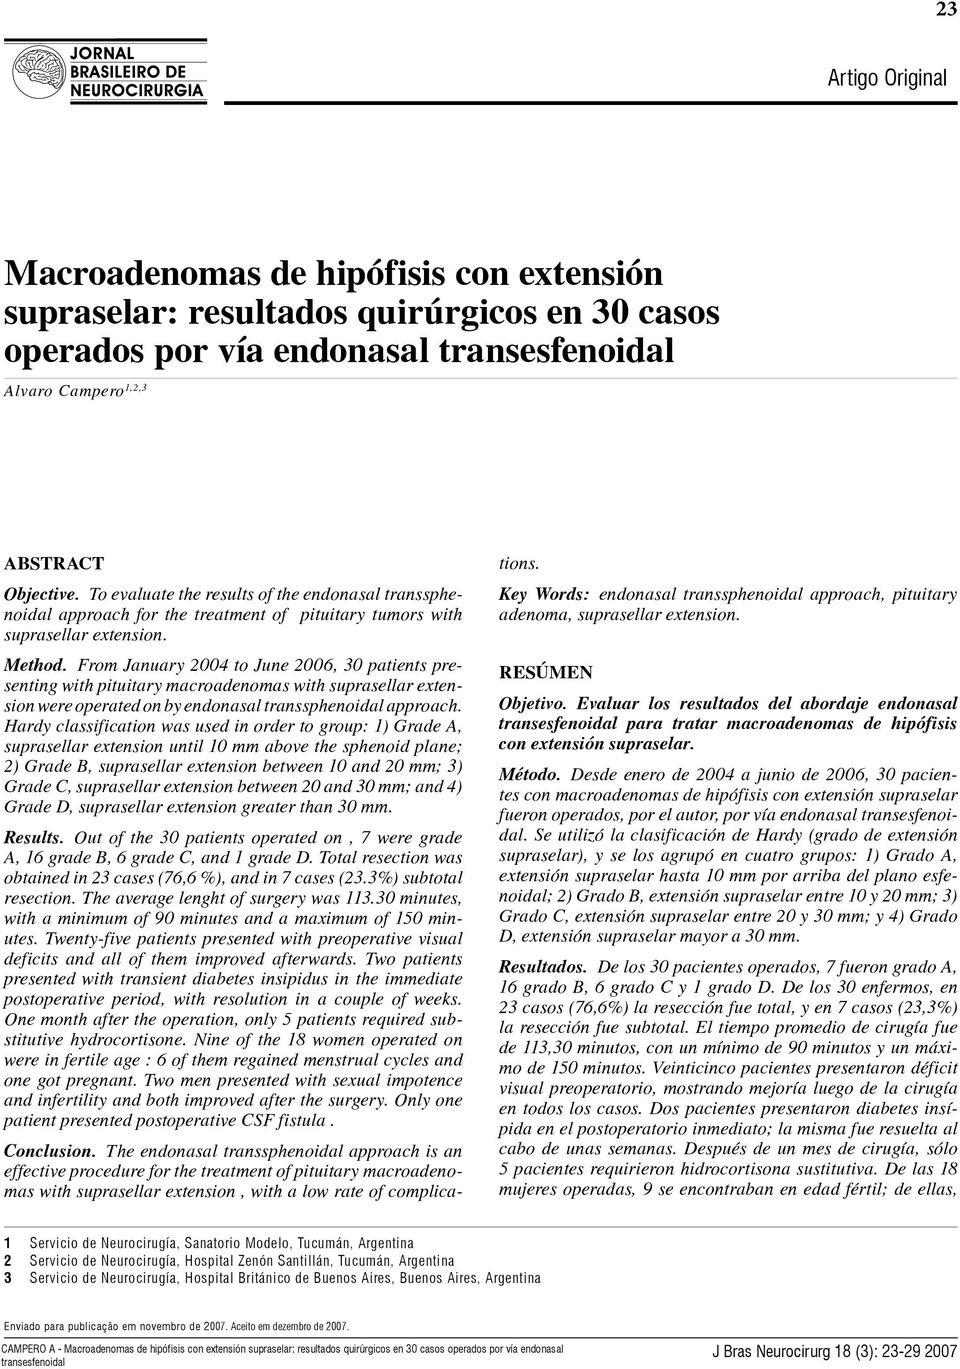 From January 2004 to June 2006, 30 patients presenting with pituitary macroadenomas with suprasellar extension were operated on by endonasal transsphenoidal approach.